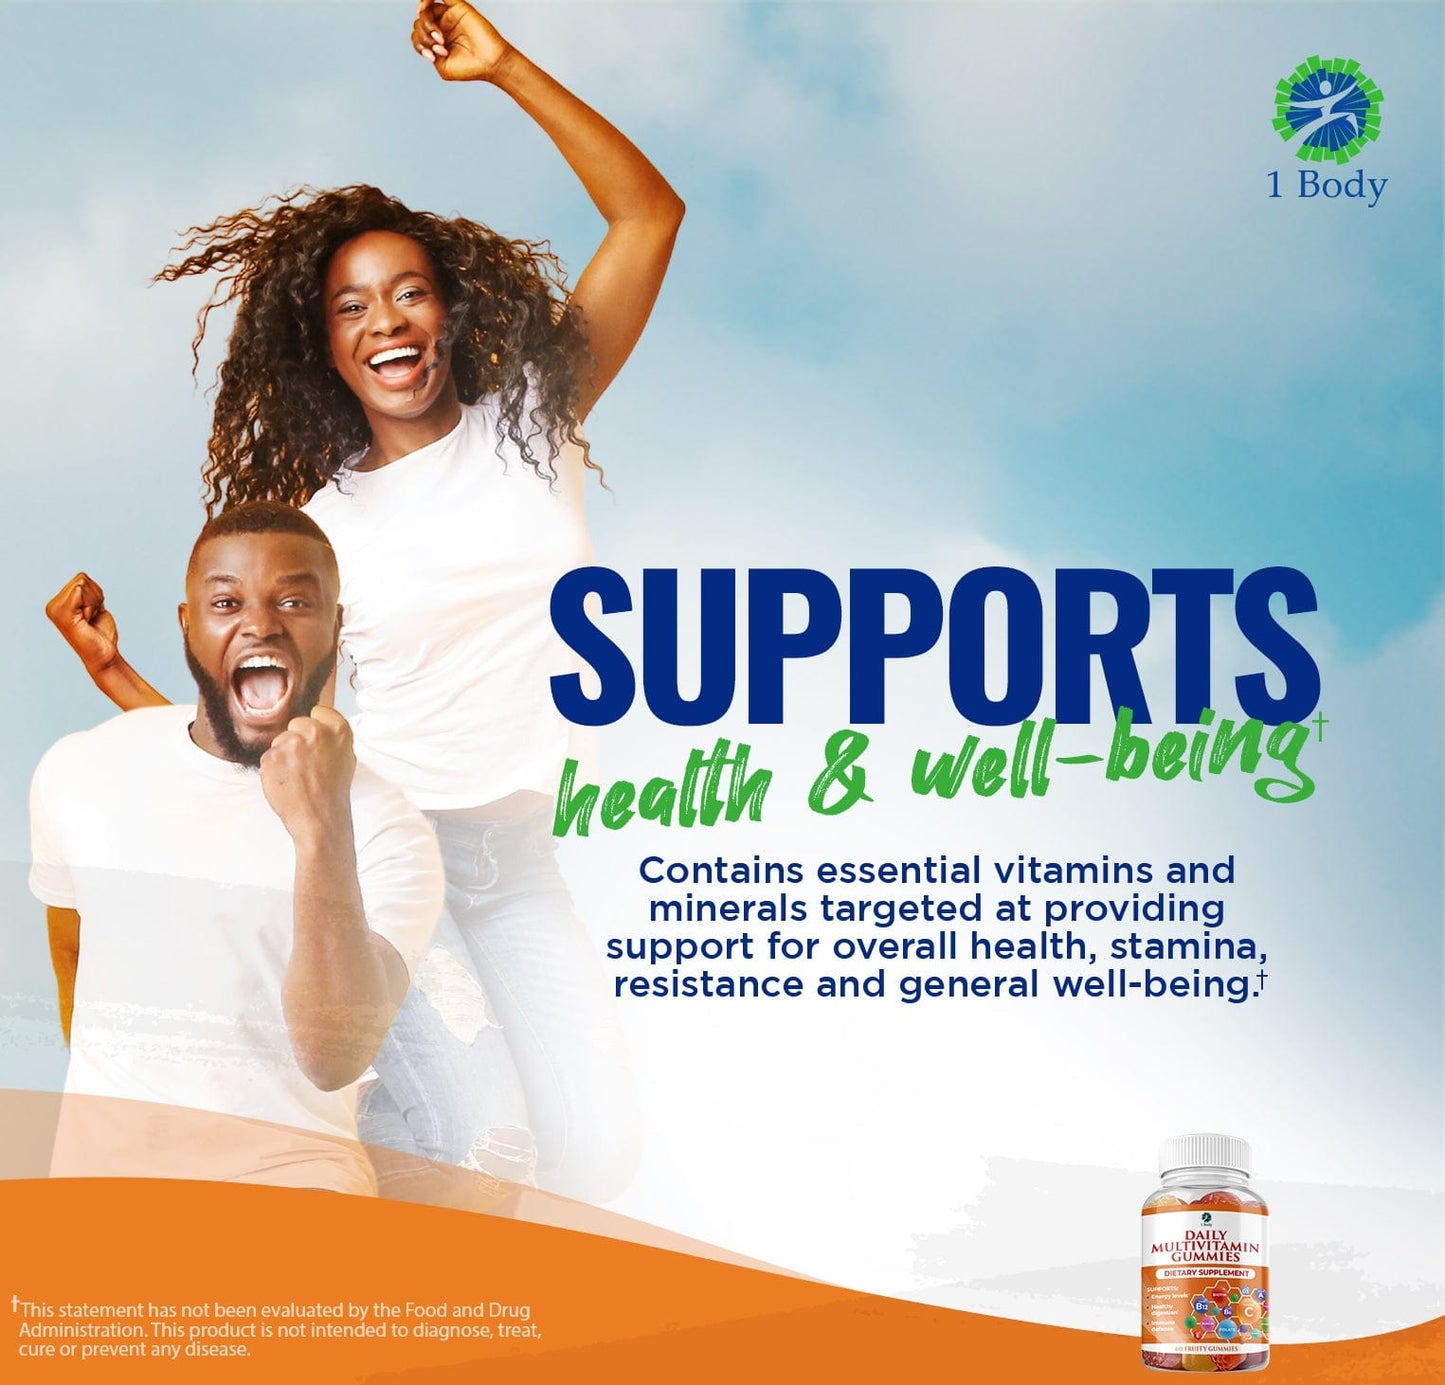 Daily Multivitamin Gummies with Folate